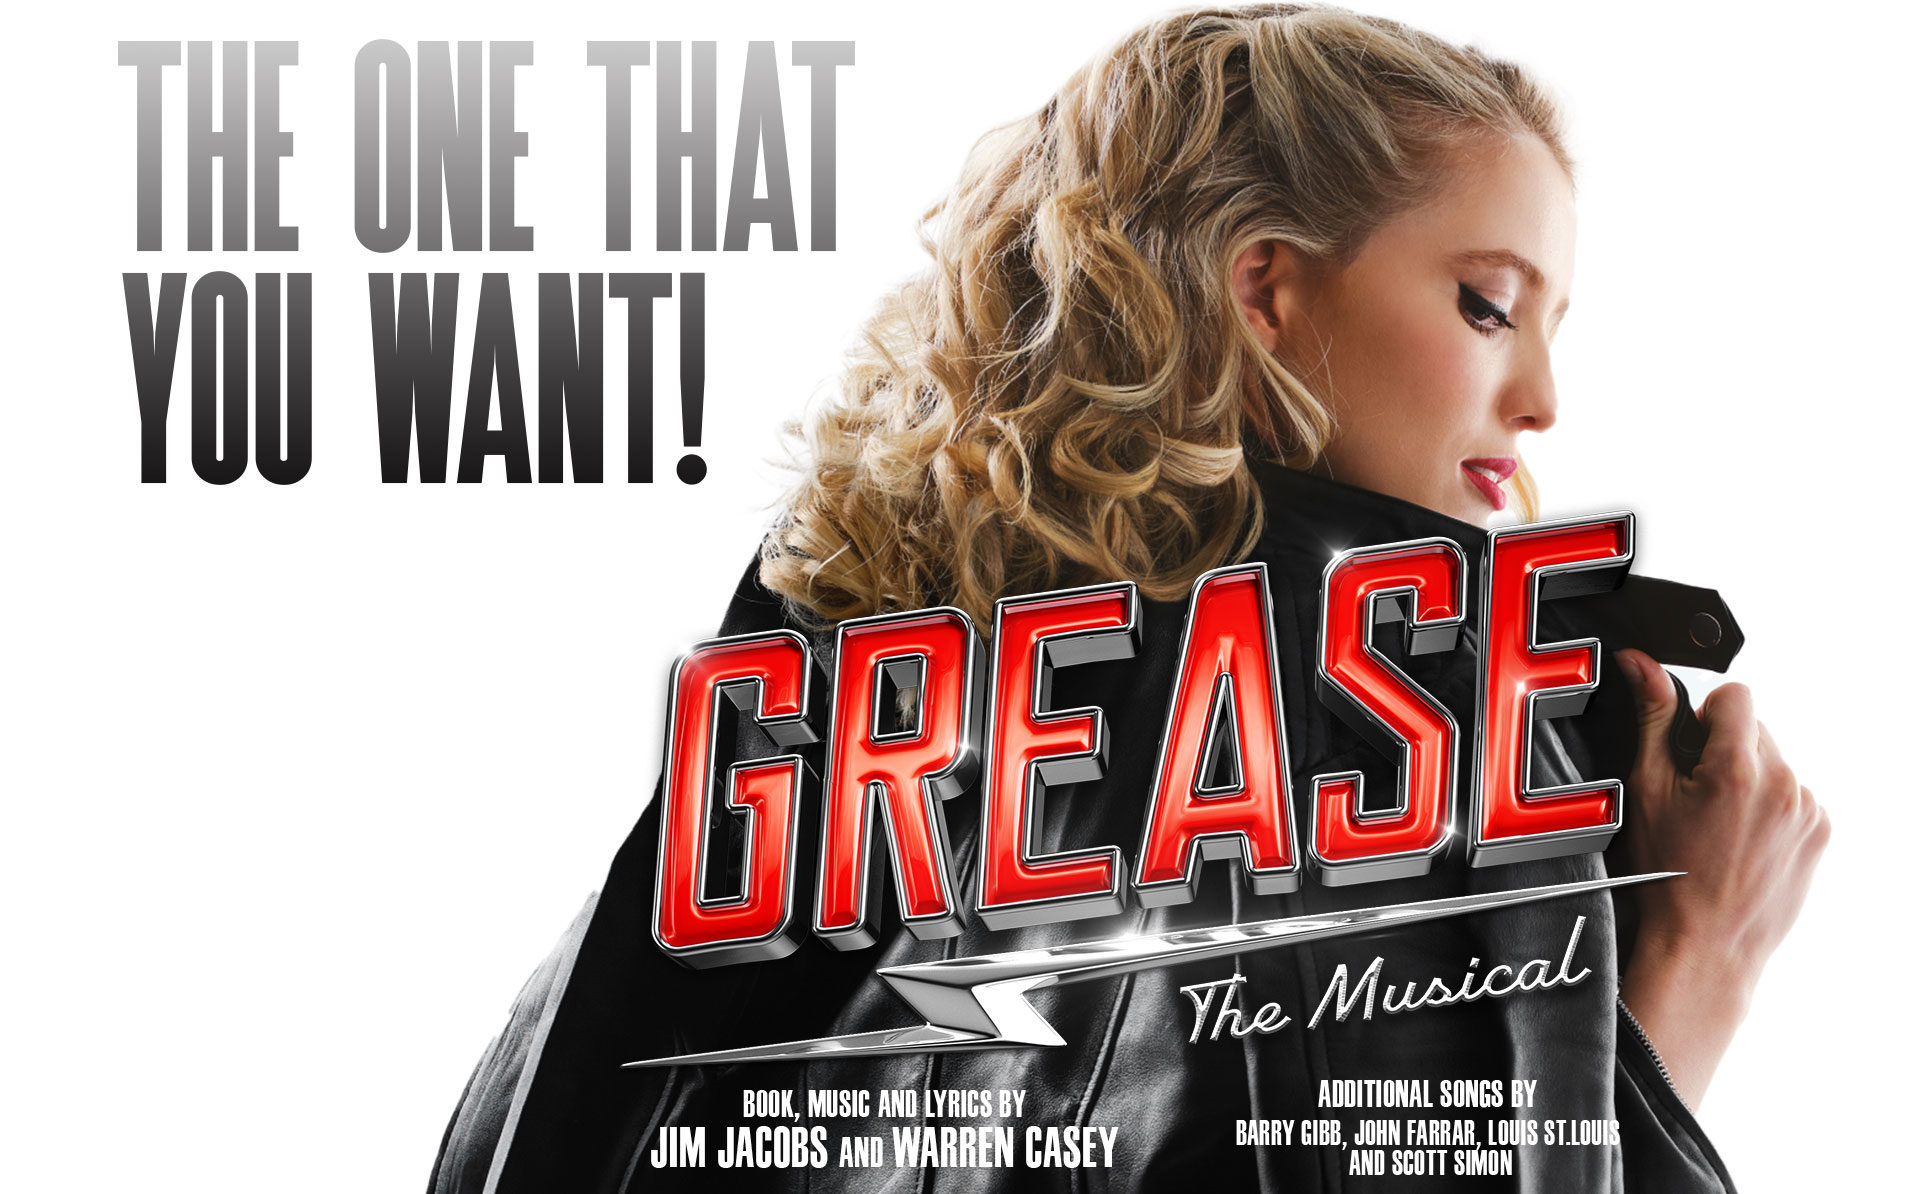 Promotional poster for "Grease: The Musical" featuring a woman in a leather jacket with curly blonde hair. The text reads "The One That You Want!" and includes credits for the book, music, and lyrics by Jim Jacobs and Warren Casey, along with promotional details for the Christmas in July 3-Course Lunch at Secrets on the Lake | 18 JULY 2024.